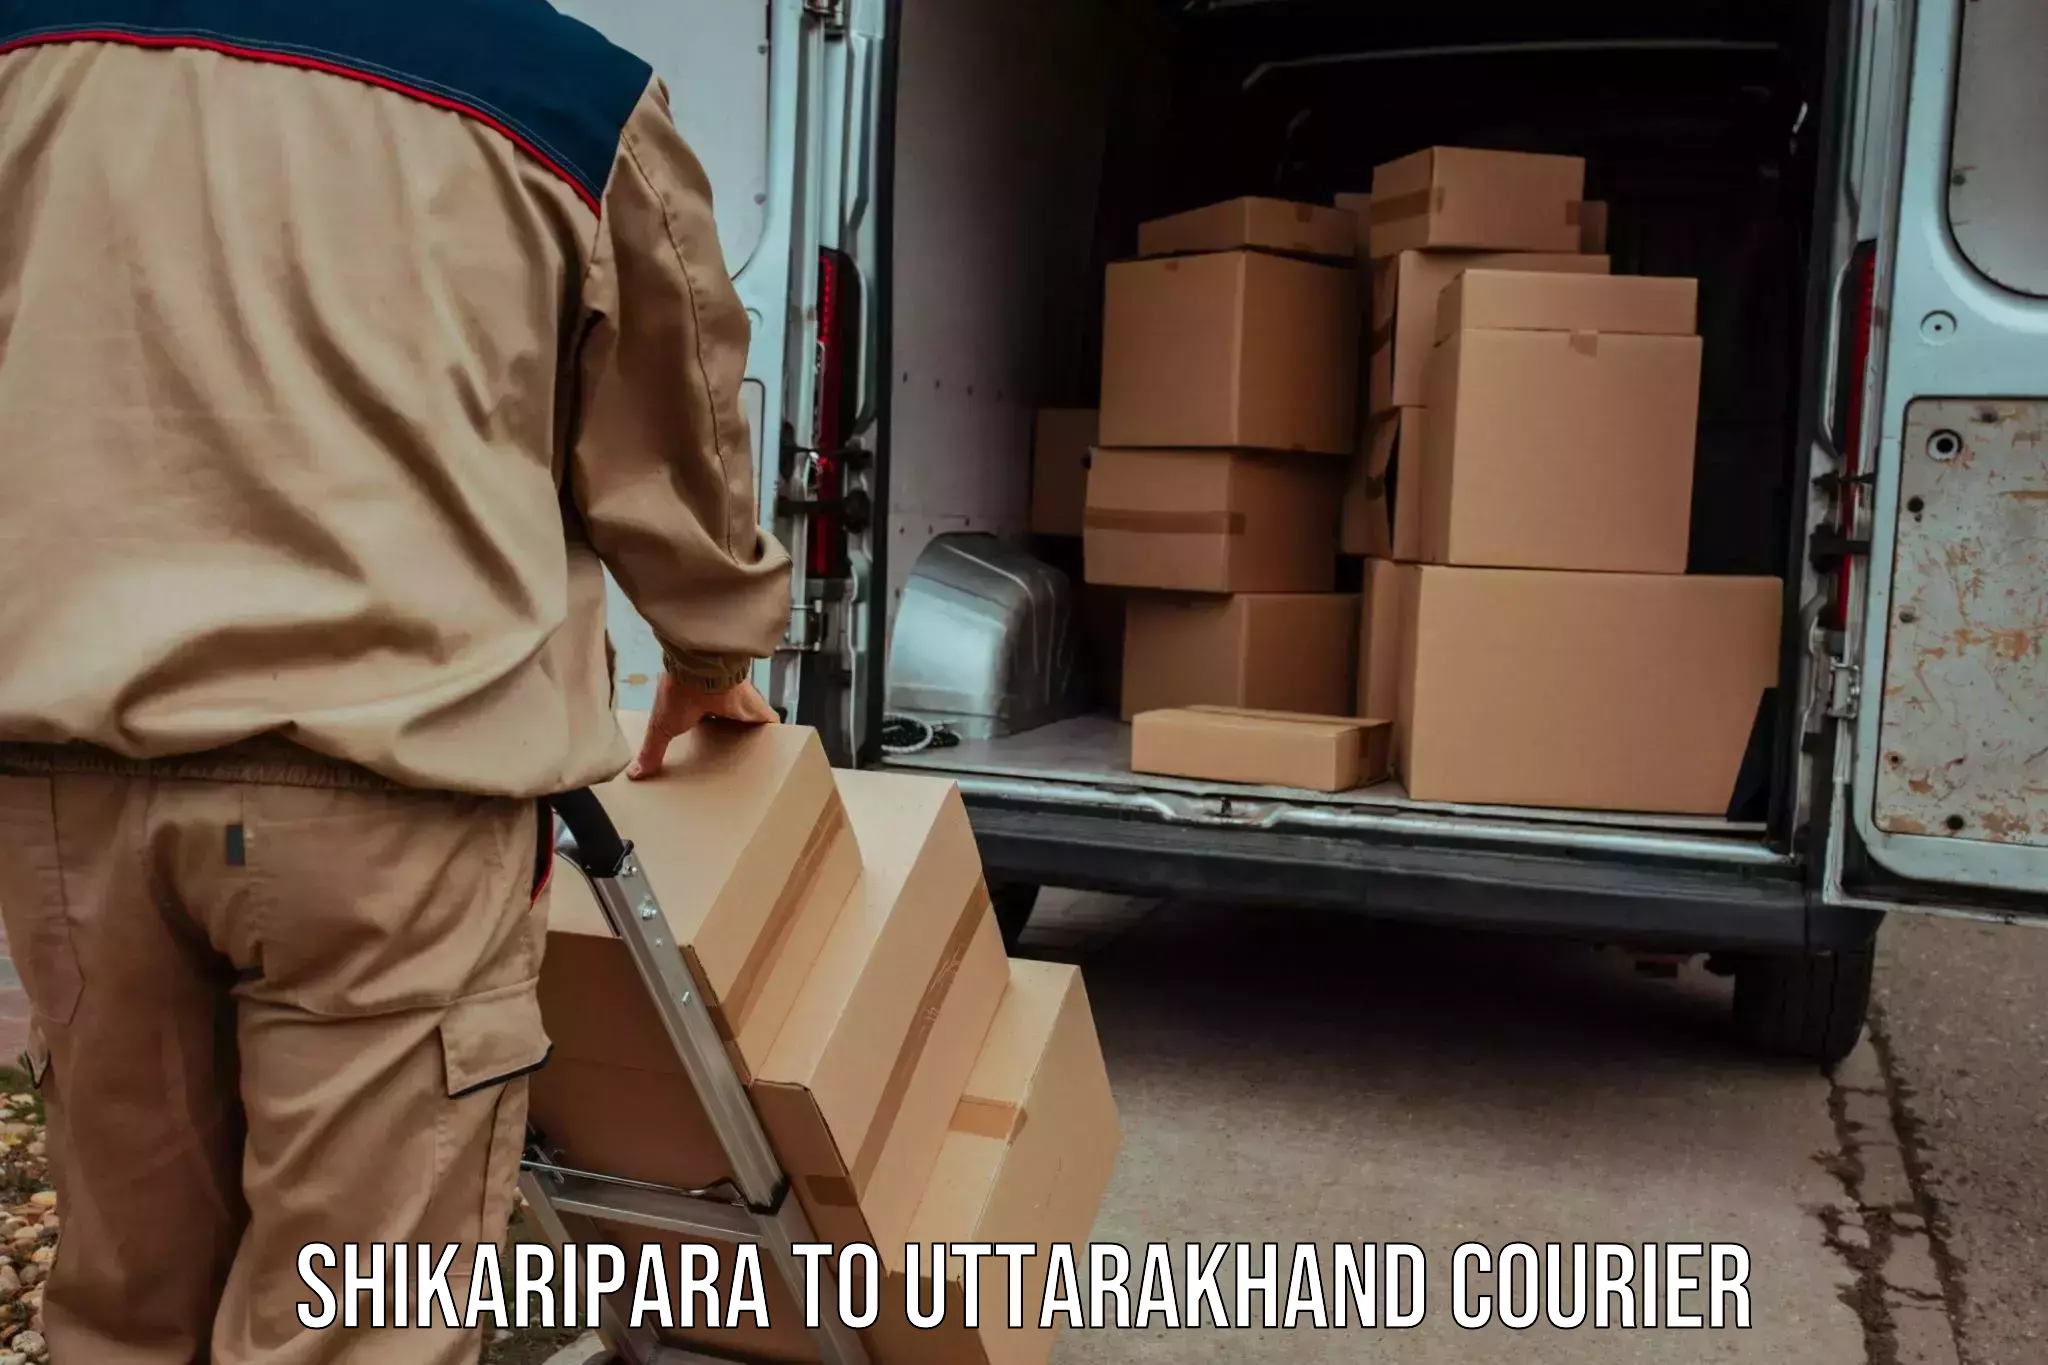 State-of-the-art courier technology Shikaripara to Pithoragarh